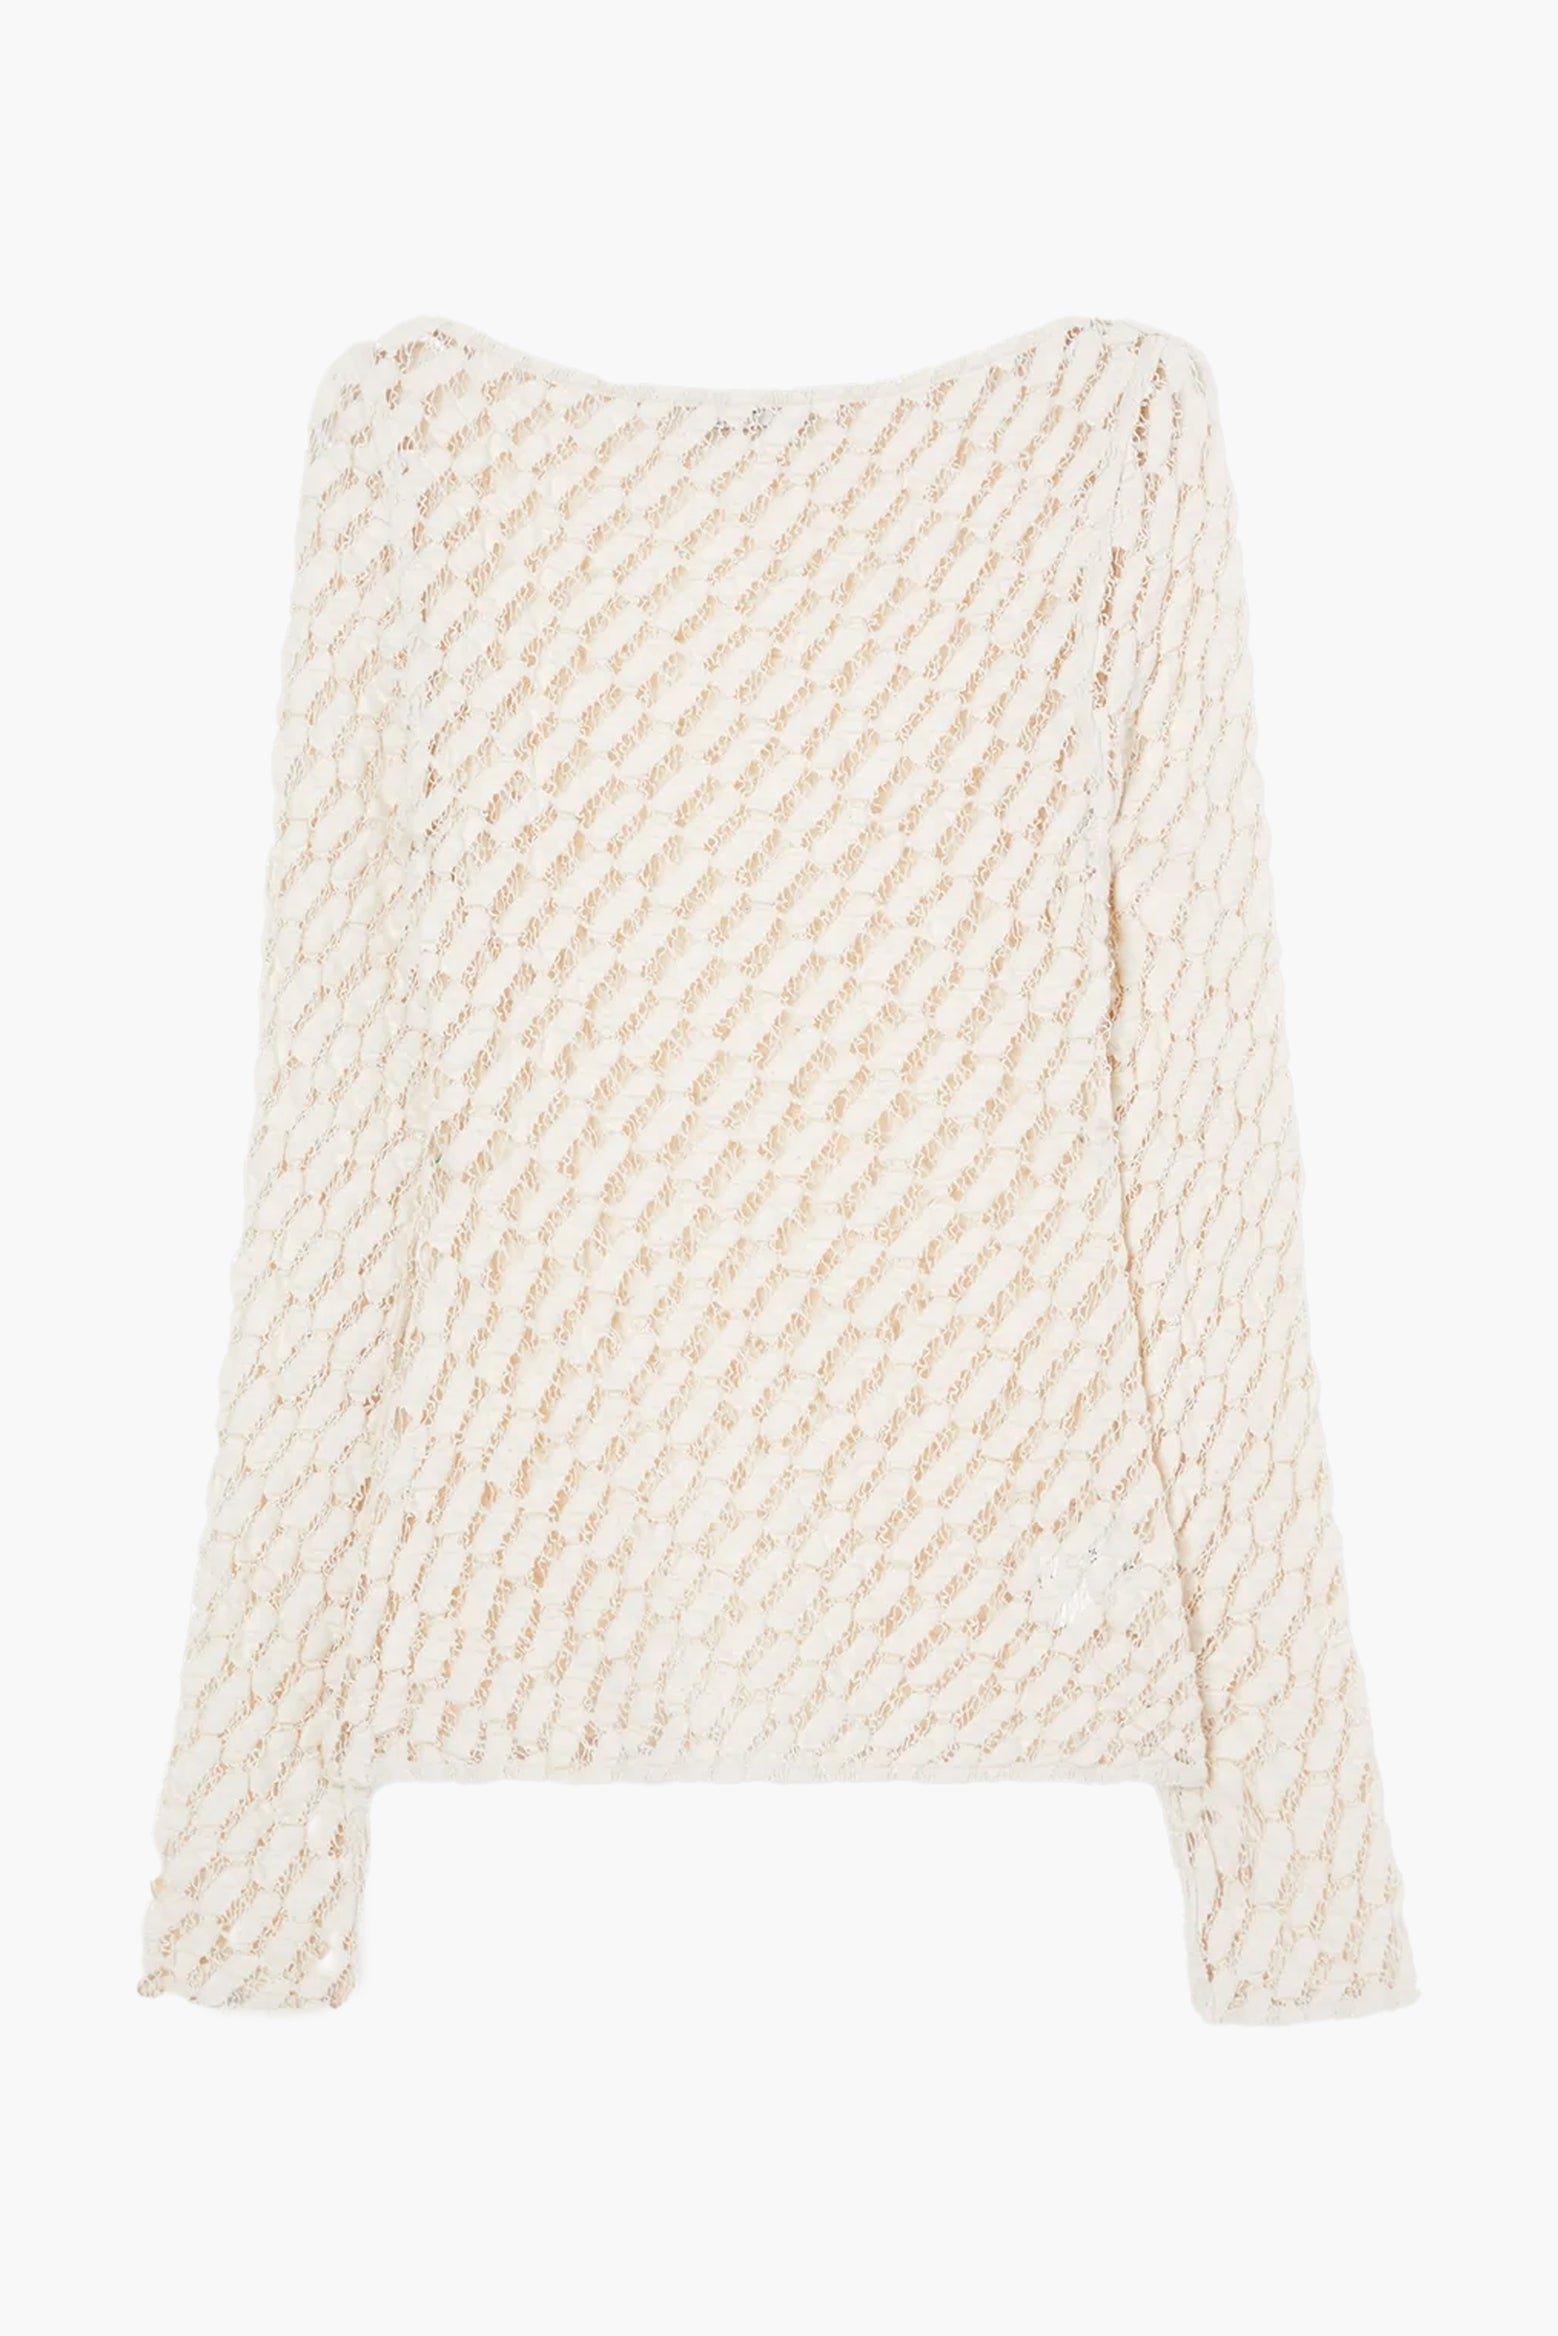 Rohe Lace Boat Neck Top in Cream available at The New Trend Australia. 